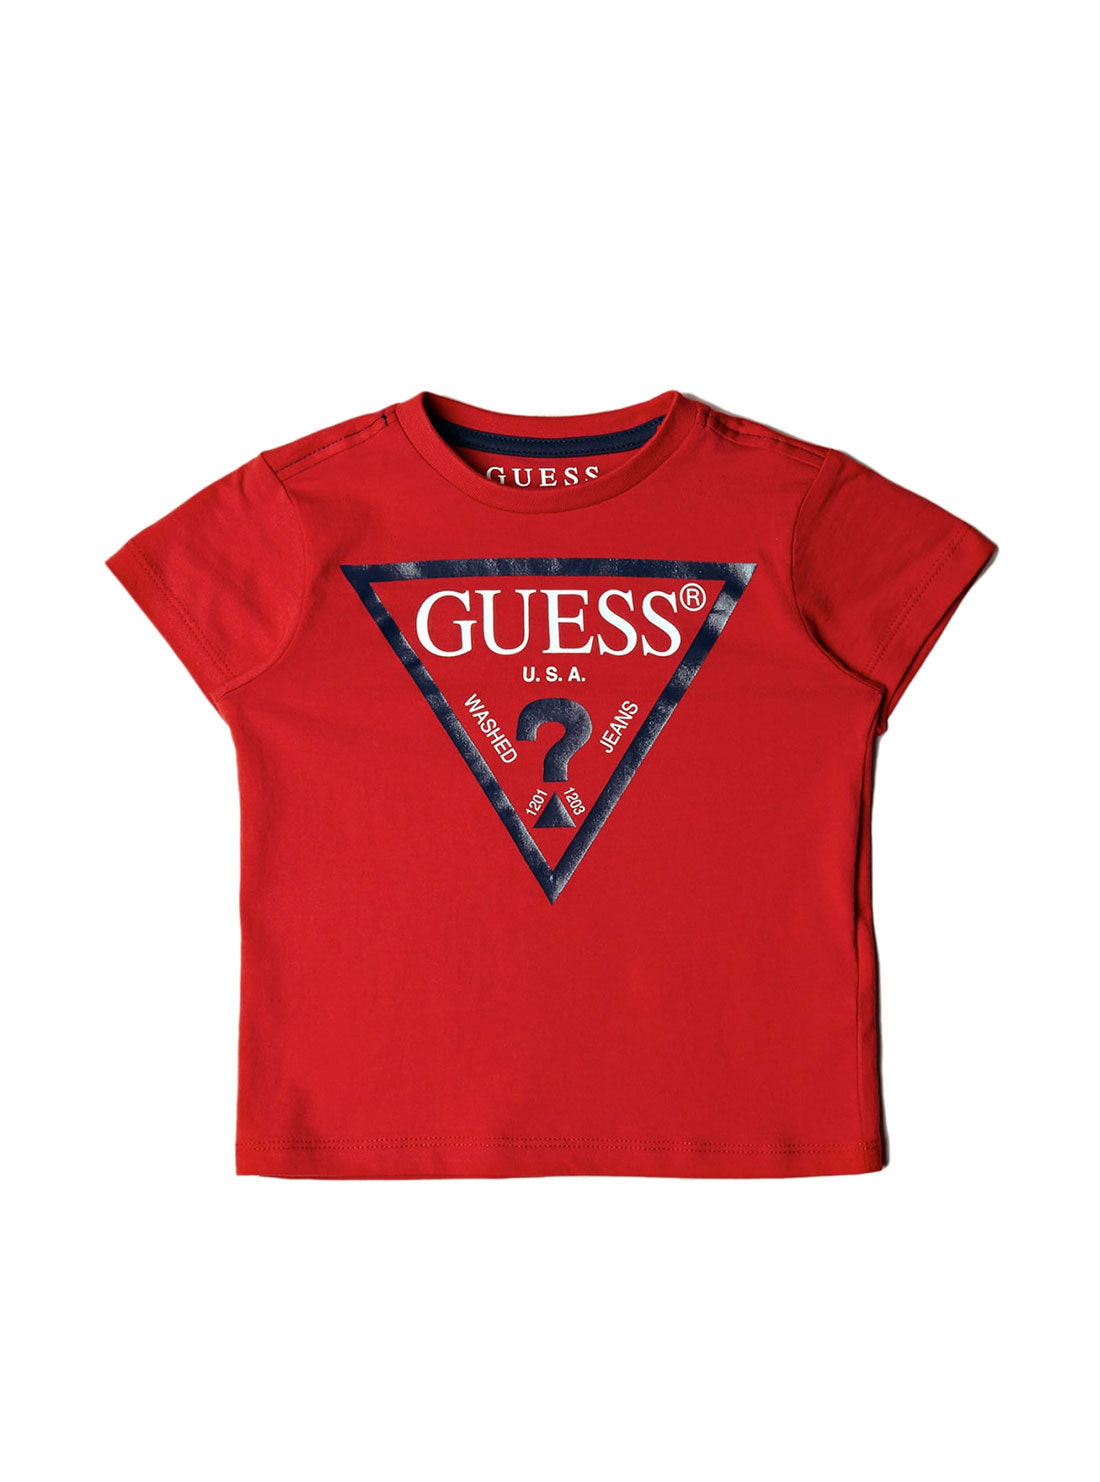 GUESS Little Boys Red Logo Short Sleeve T-Shirt (2-7)  N73I55K8HM0 Front View